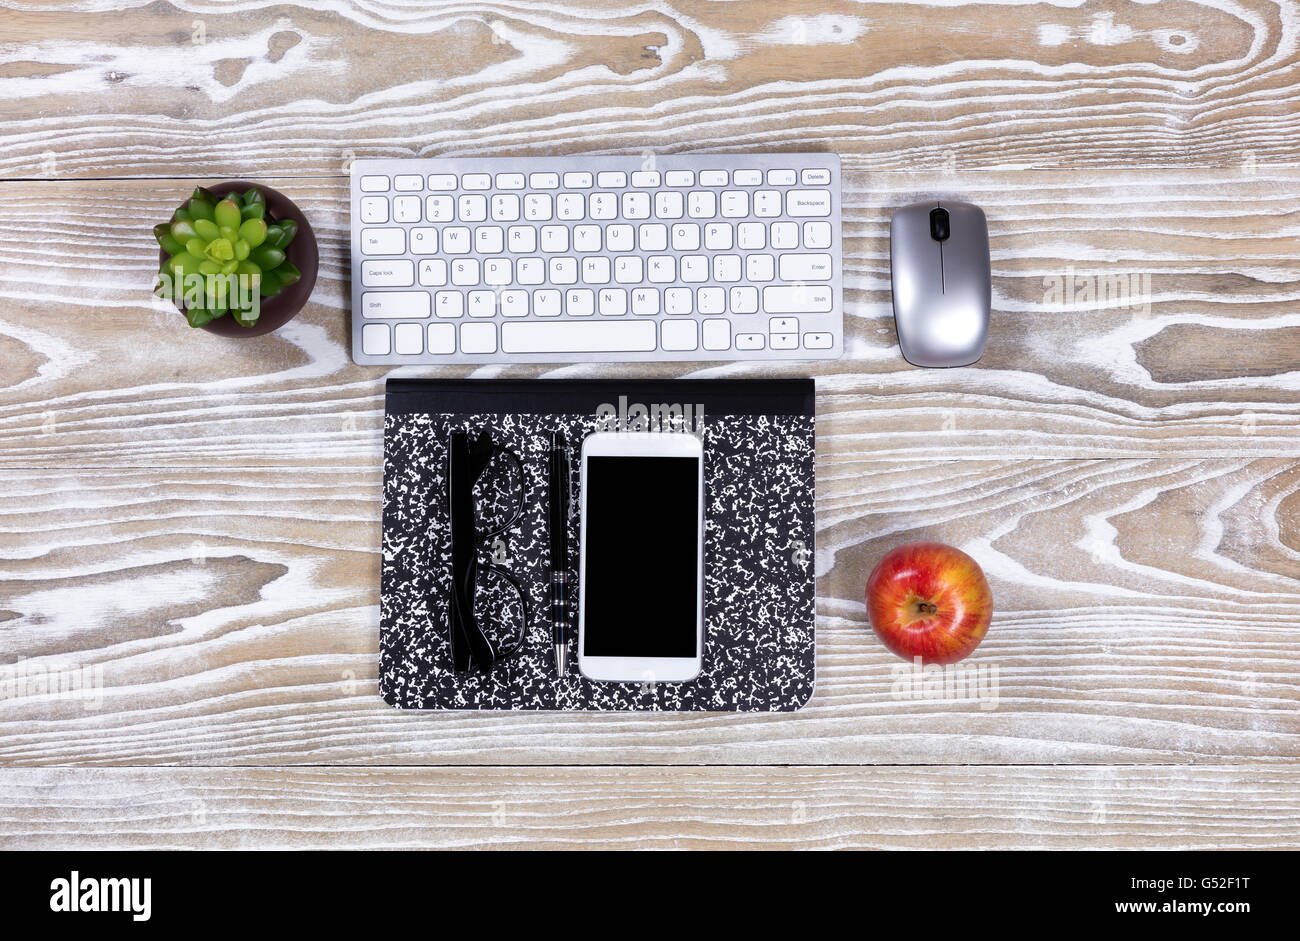 Old desktop with notepad, pen, apple, computer keyboard, plant, mouse, reading glasses, apple and cell phone. Stock Photo